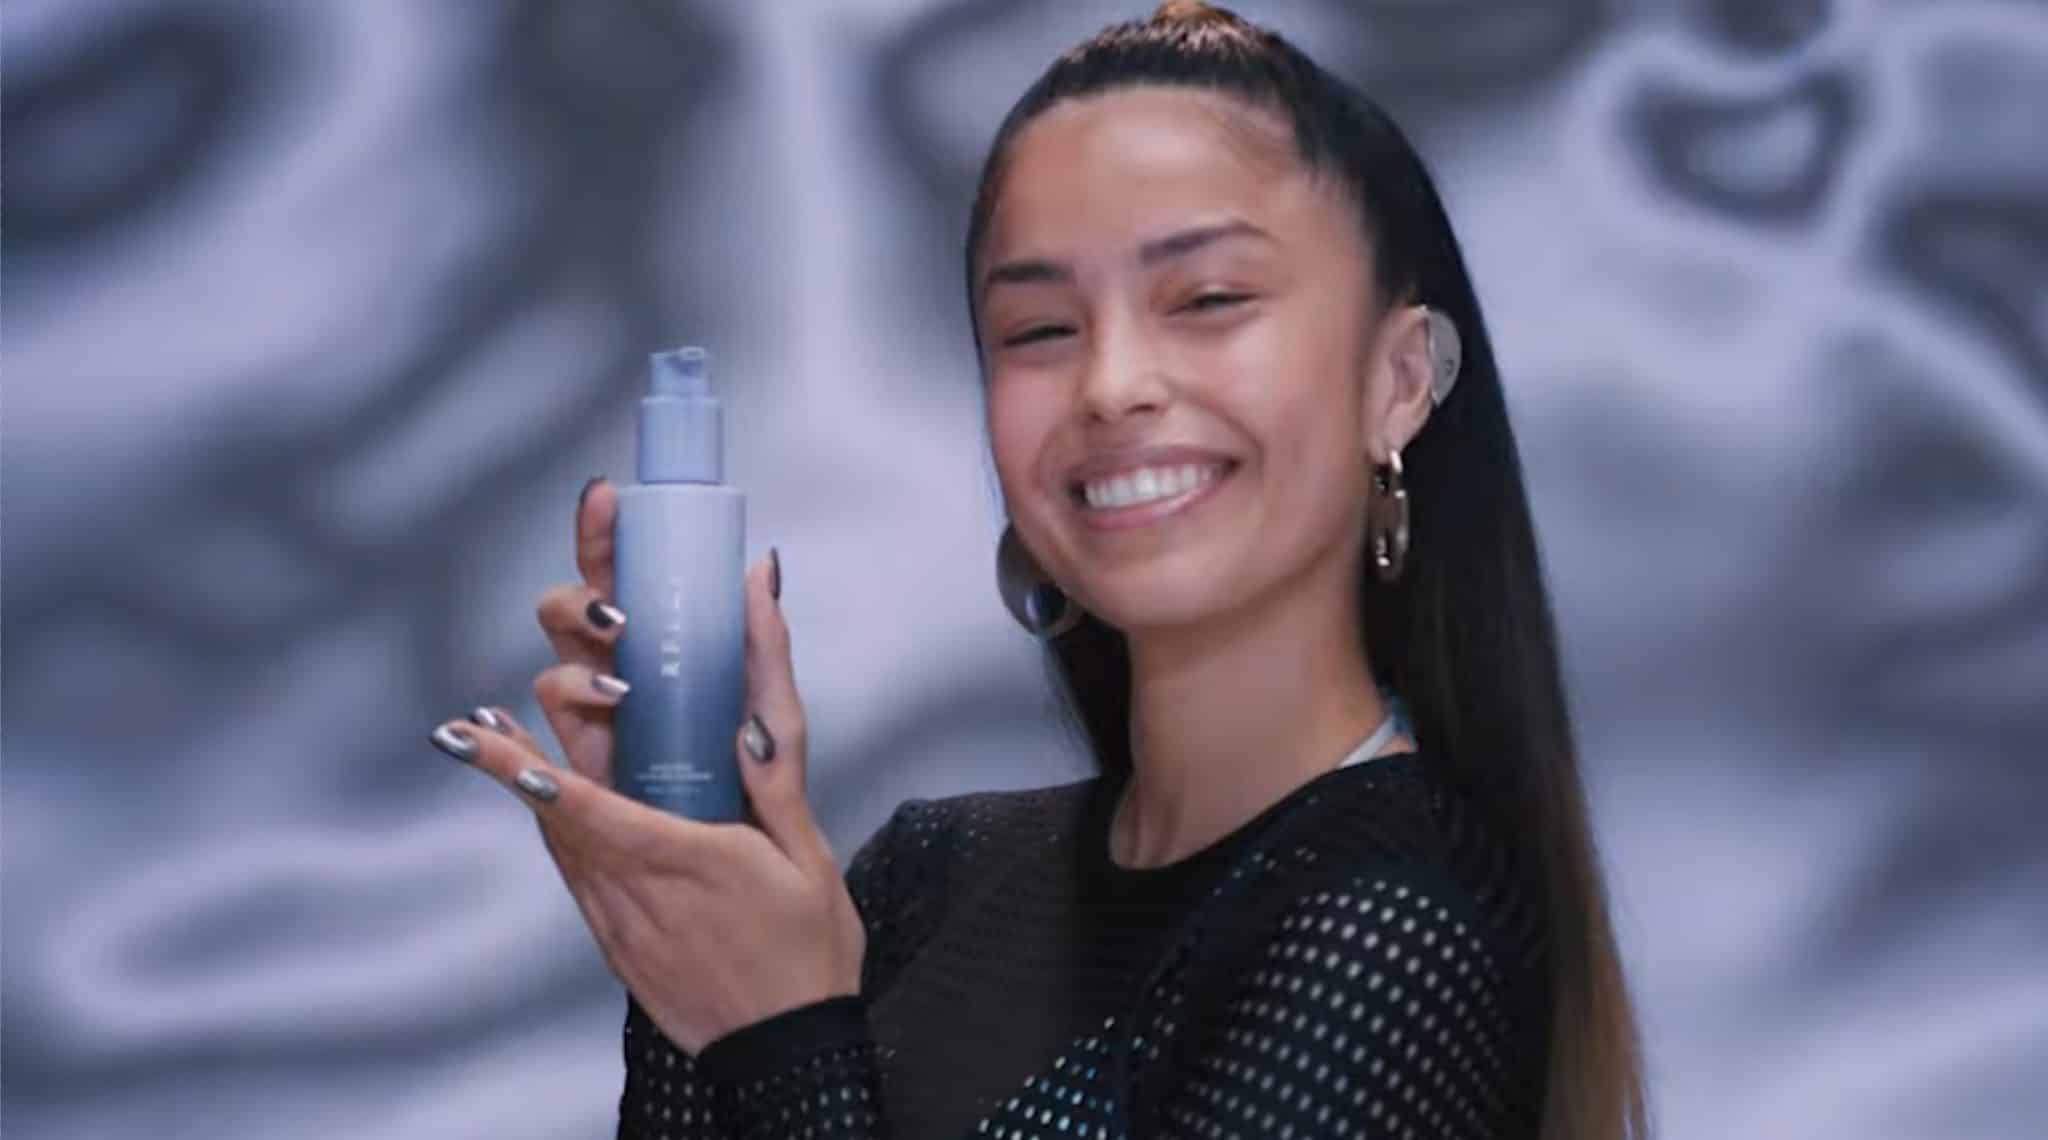 Valkyrae posing with RFLCT products